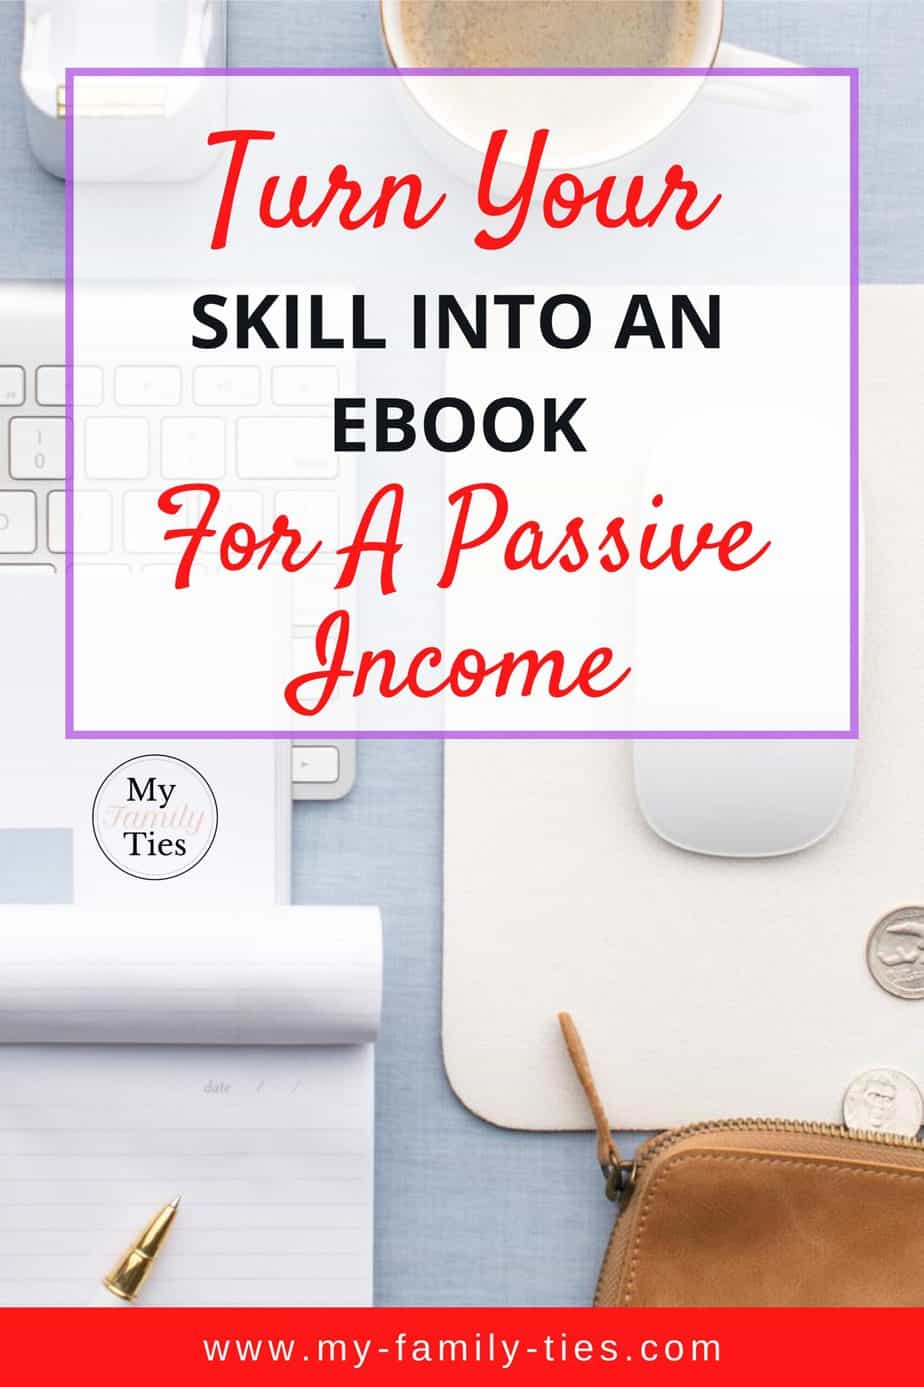 Turn your skill into an ebook today for a passive income | My Family Ties